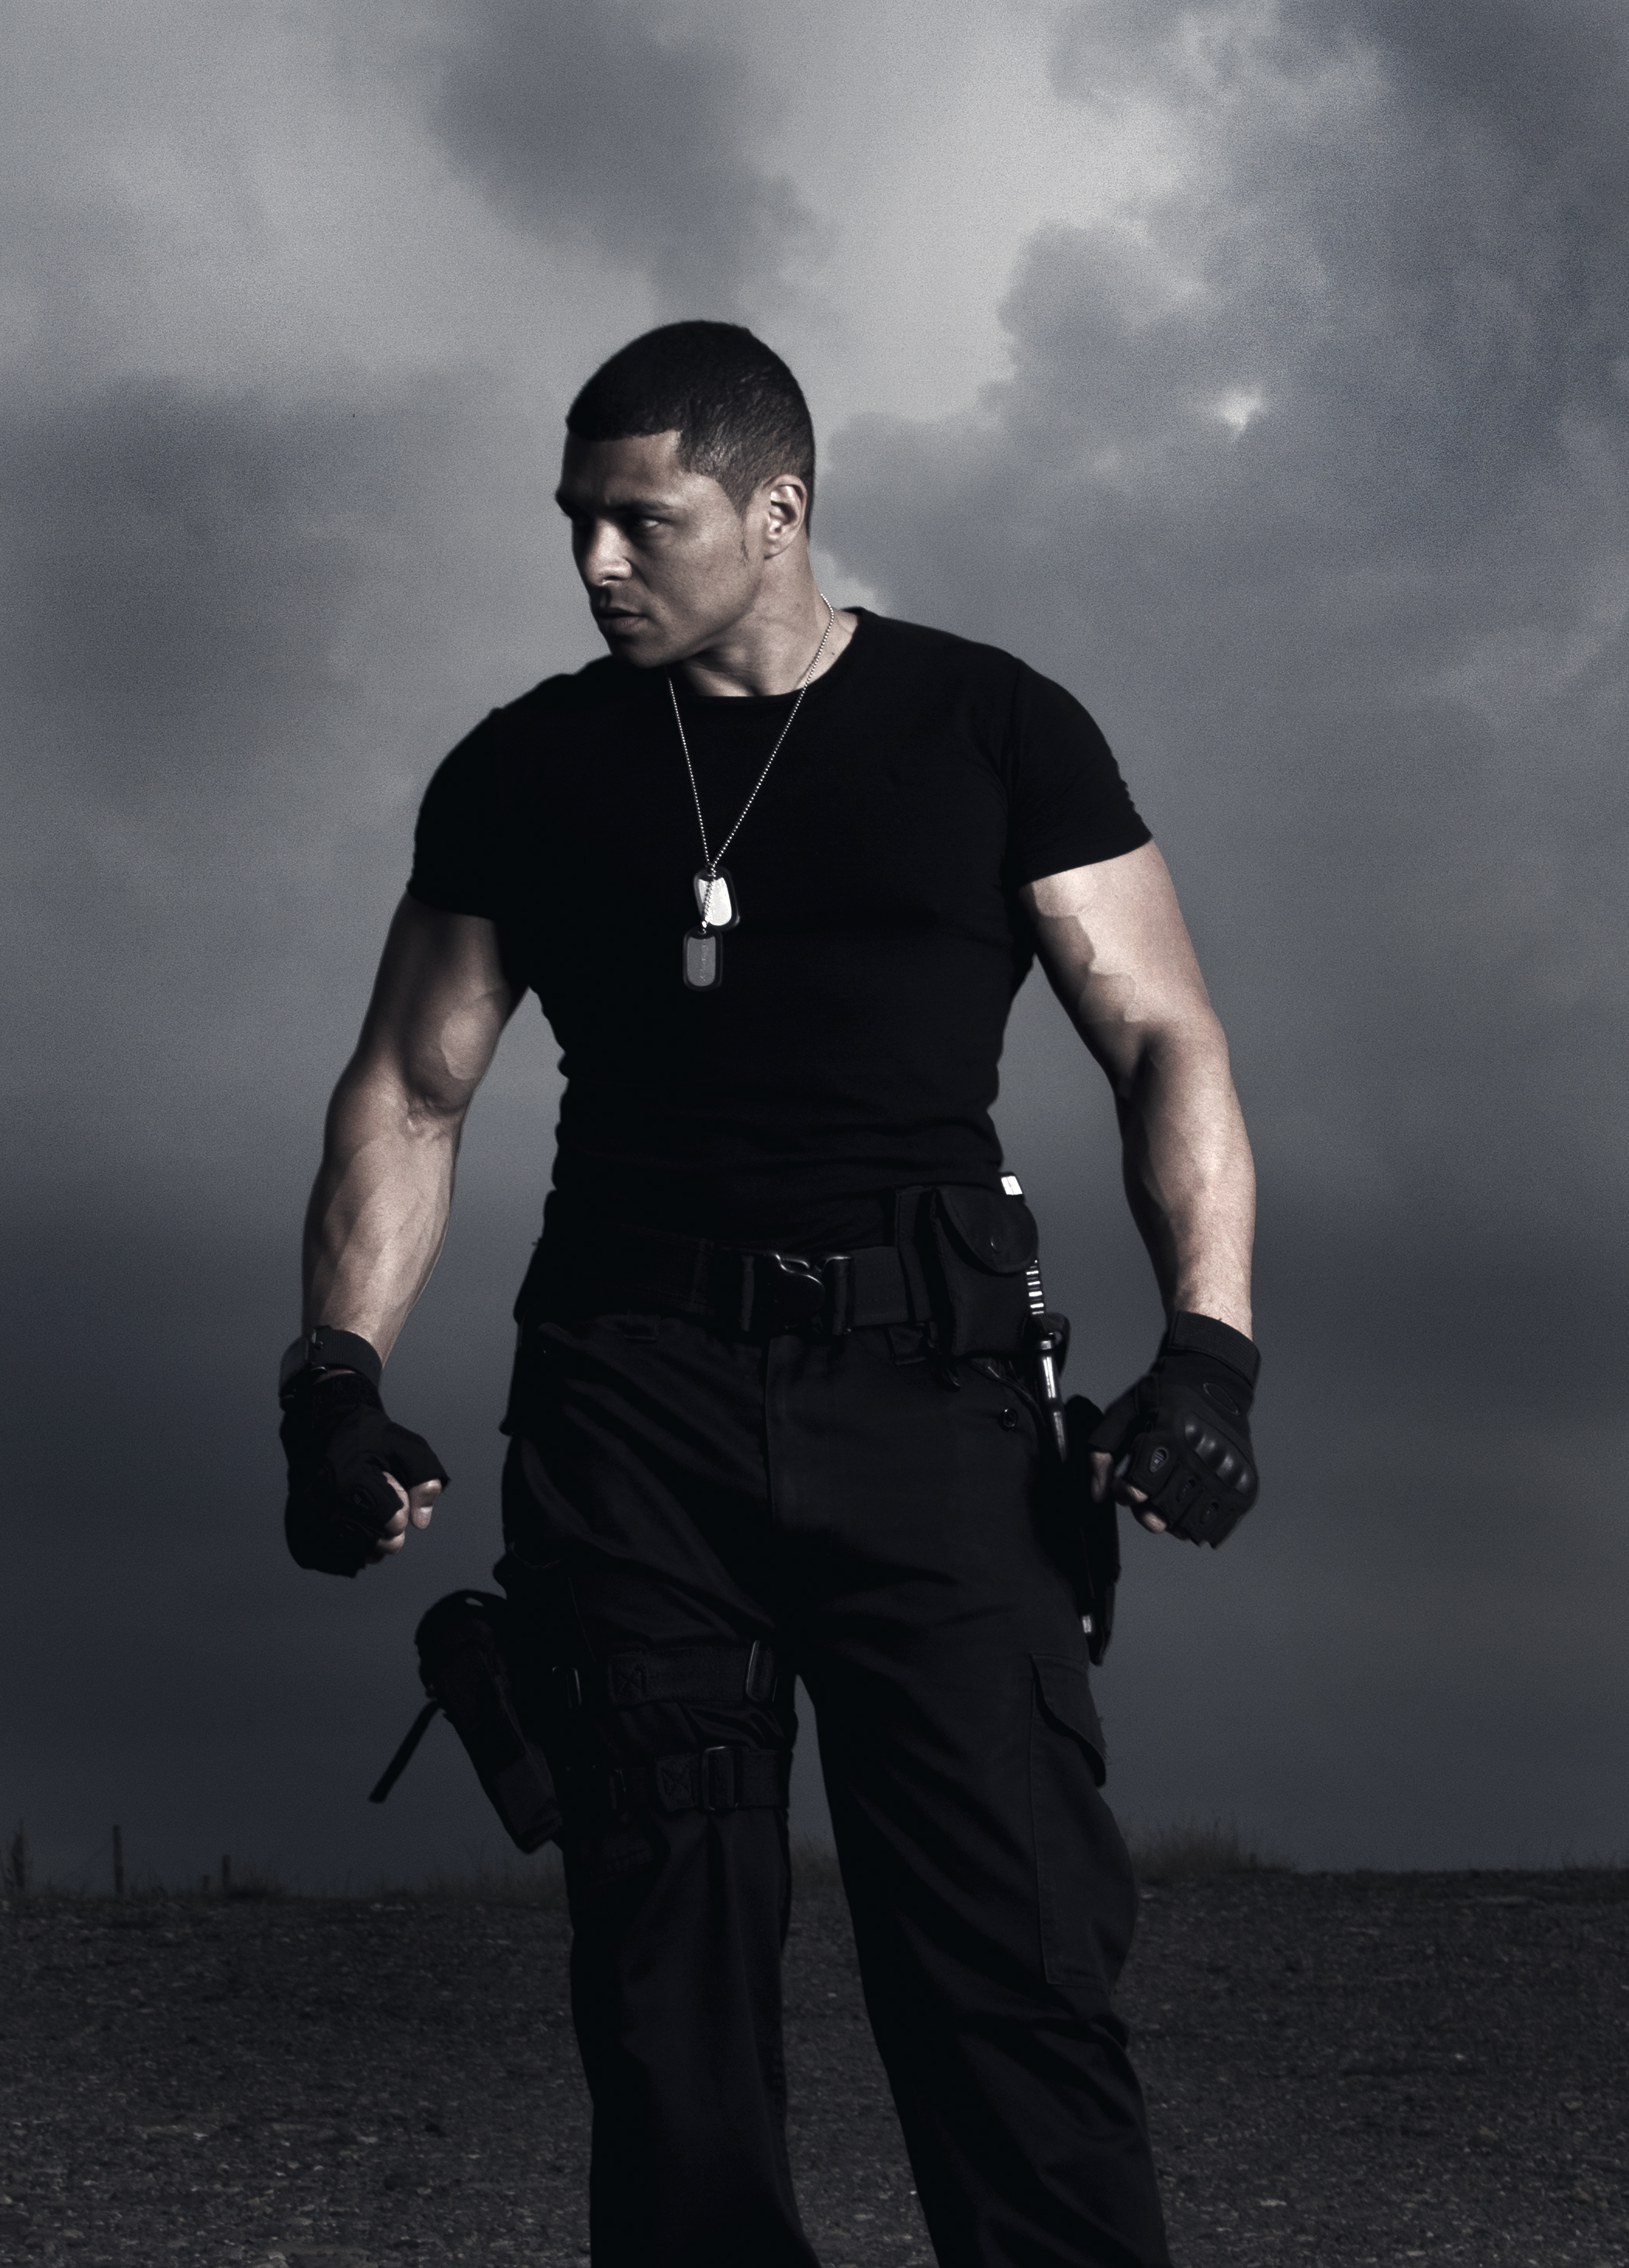 Conceptual acting photo shoot. In the style of: Expendables, Police, S.W.A.T.